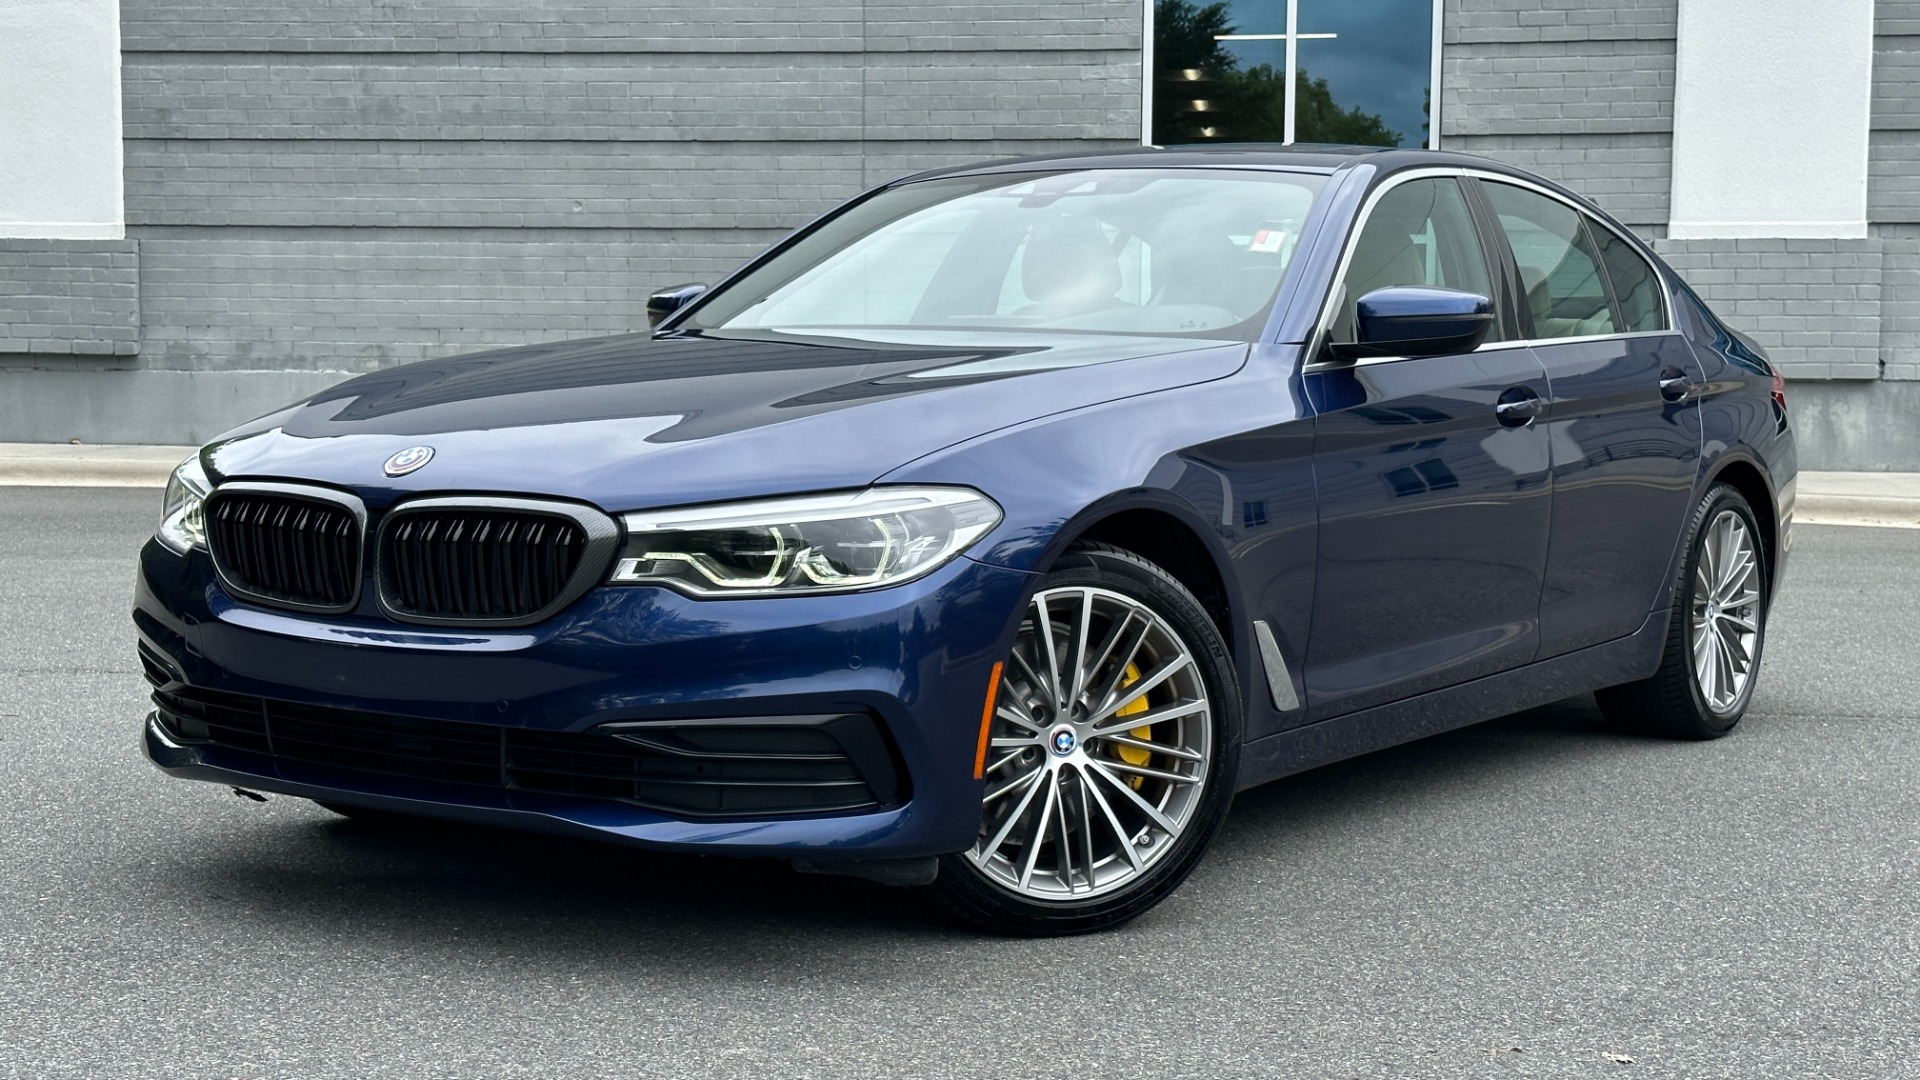 Used 2019 BMW 5 Series 530i / LIGHTING PACKAGE / CONVENIENCE PACKAGE / 19IN WHEELS for sale Sold at Formula Imports in Charlotte NC 28227 1